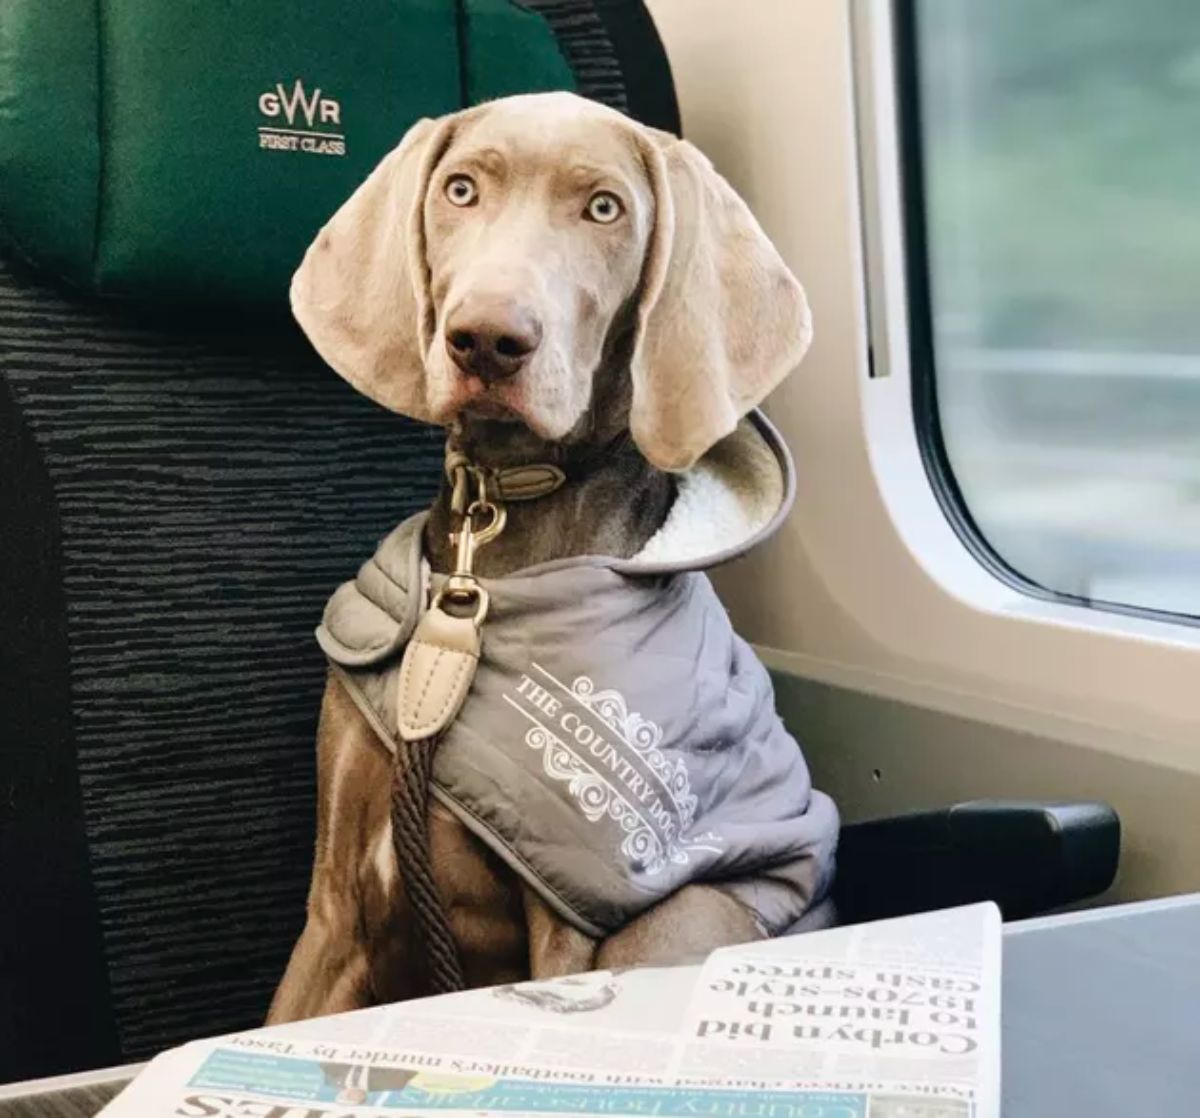 grey weimaraner wearing a grey jacket and sitting on a black and grey train seat